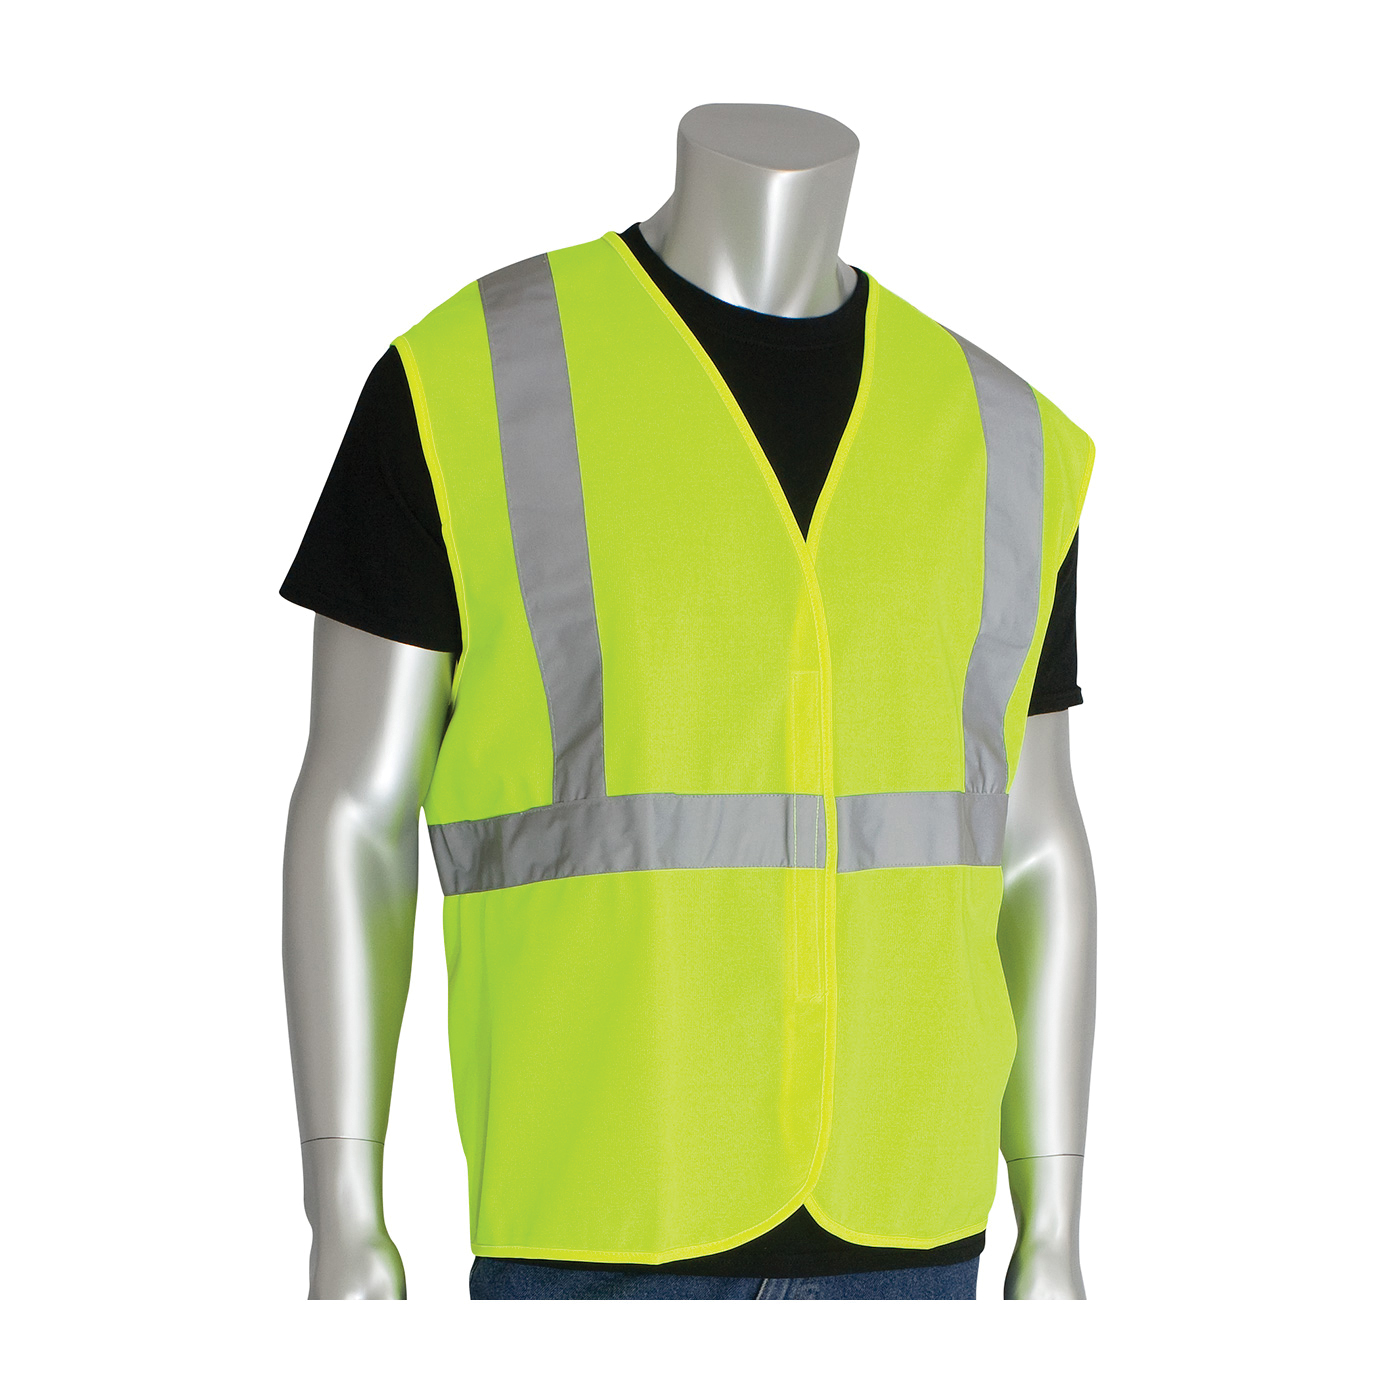 PIP® 302-WCENGLY-3X Solid Vest, 3XL, Hi-Viz Lime Yellow, Polyester, Hook and Loop Closure, ANSI Class: Class 2, Specifications Met: ANSI 107 Type R